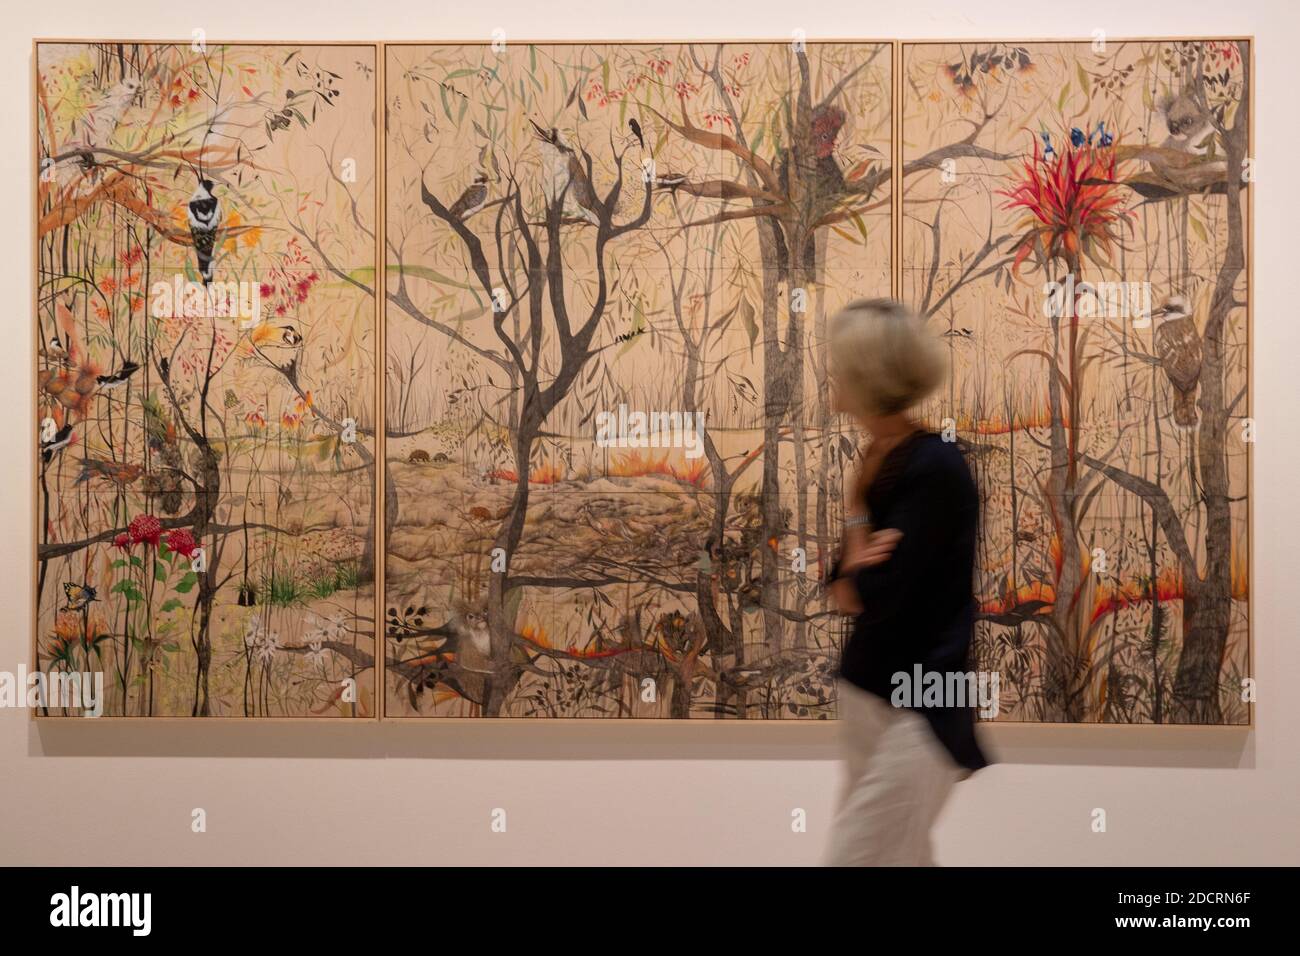 Sydney, Australia. 23rd Nov, 2020. A woman visits the Archibald Prize exhibition in the Art Gallery of New South Wales in Sydney, Australia, Nov. 23, 2020. Australia's Archibald Prize has been won by an Indigenous artist. Vincent Namatjira claimed 2020's Archibald Prize for his portrait of AFL legend Adam Goodes, who is also Indigenous, in a work titled 'Stand strong for who you are.' TO GO WITH 'Indigenous Vincent Namatjira claims 2020's Archibald Prize' Credit: Zhu Hongye/Xinhua/Alamy Live News Stock Photo